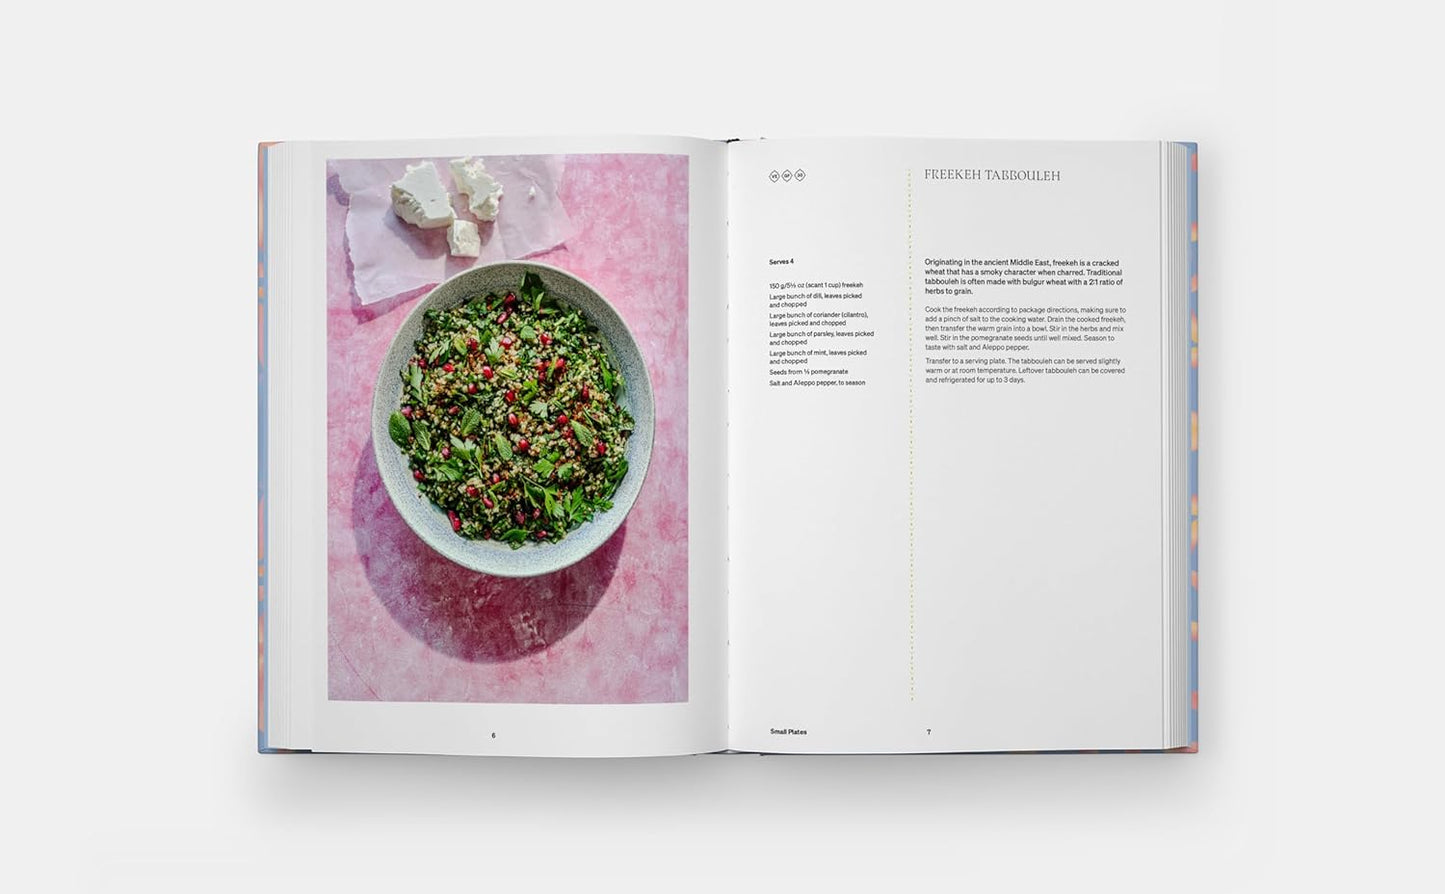 The Levantine Vegetarian: Recipes from the Middle East by Salma Hage - Phaidon Press